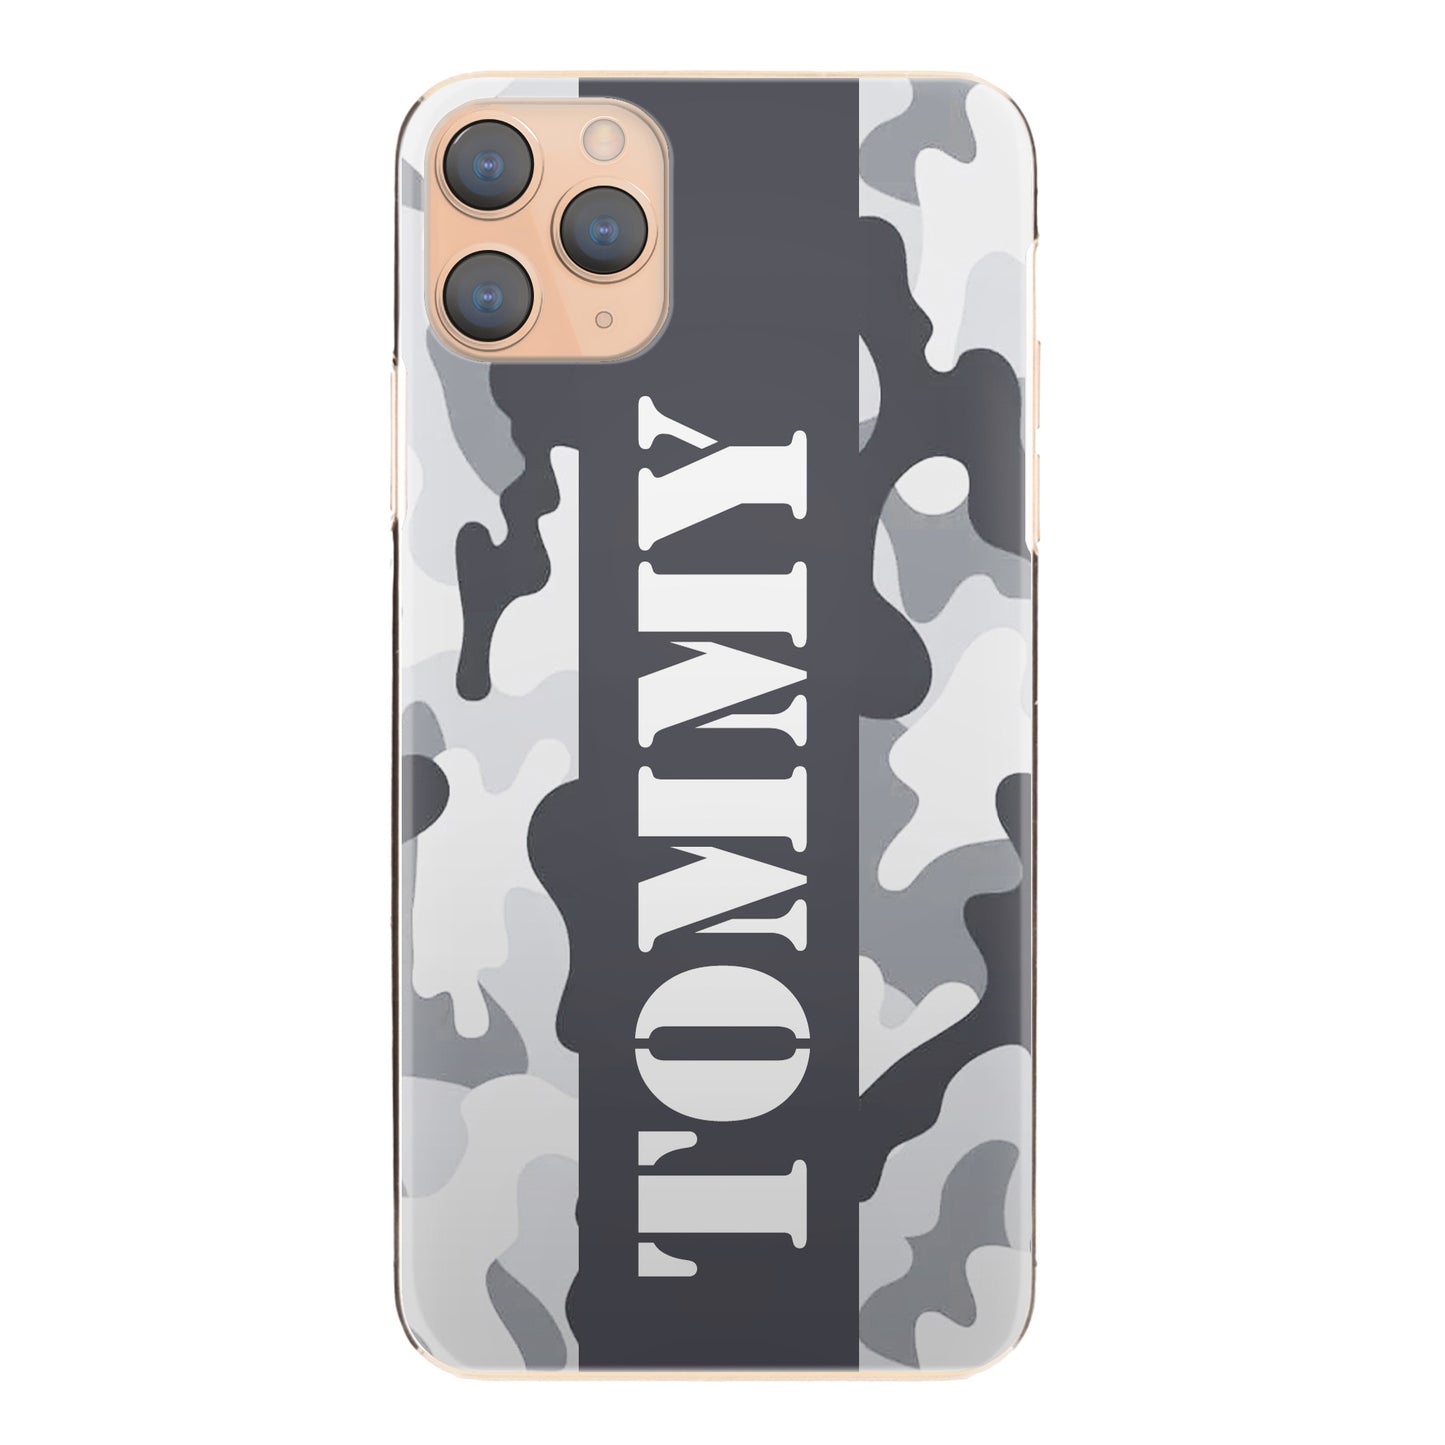 Personalised Motorola Phone Hard Case with Military Text on Artic Camo